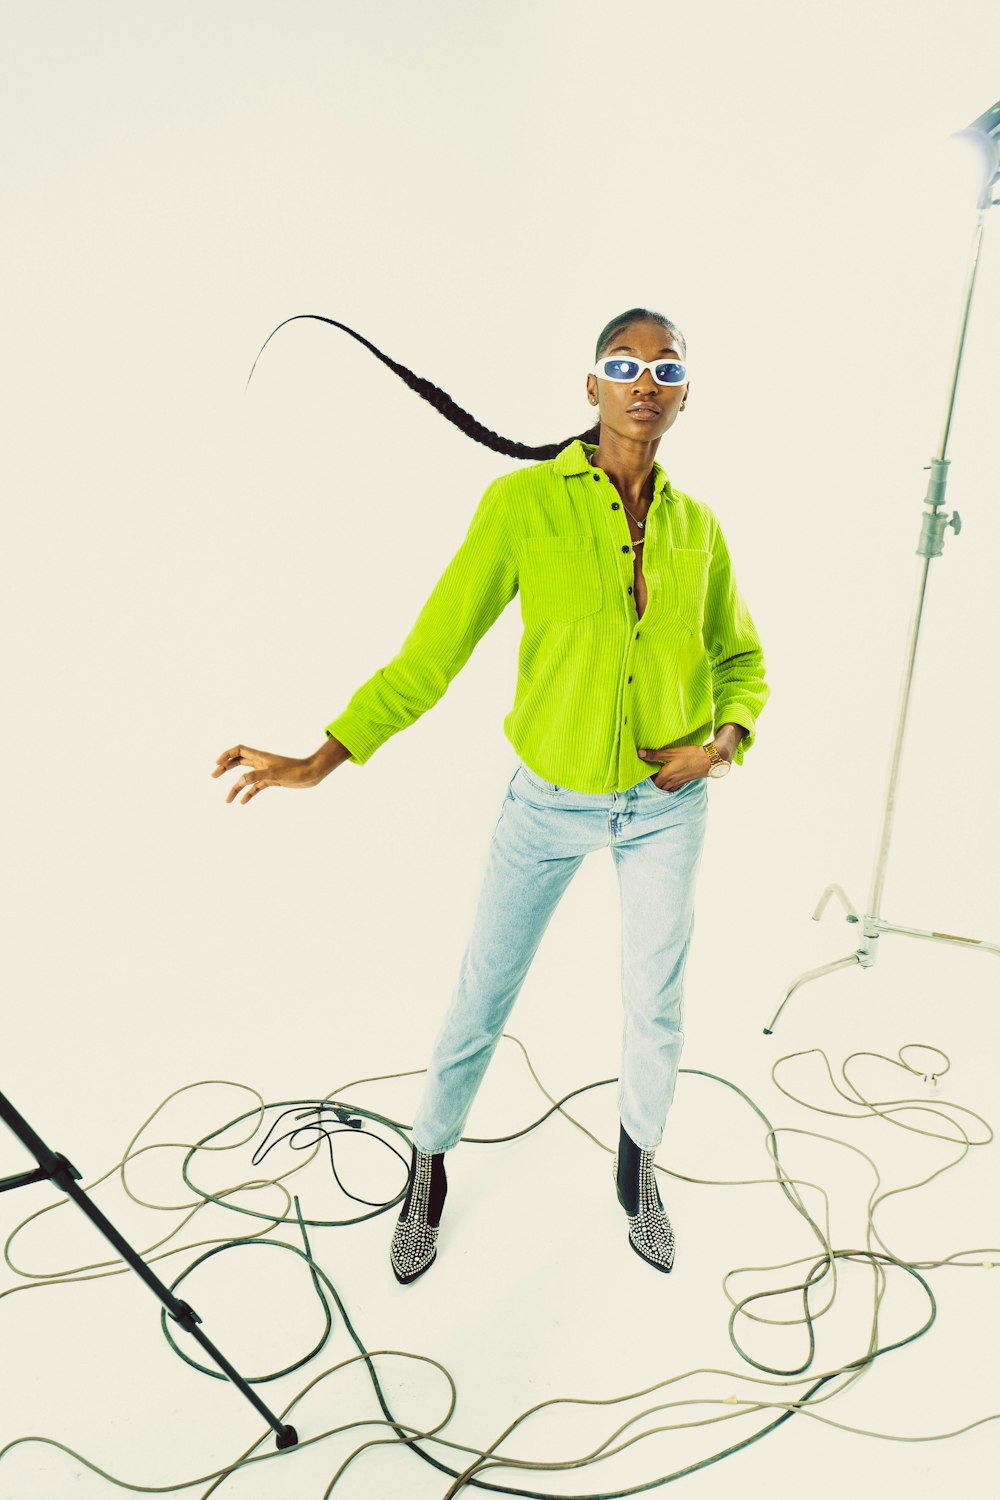 a man wearing sunglasses and a green shirt jumping on a rope